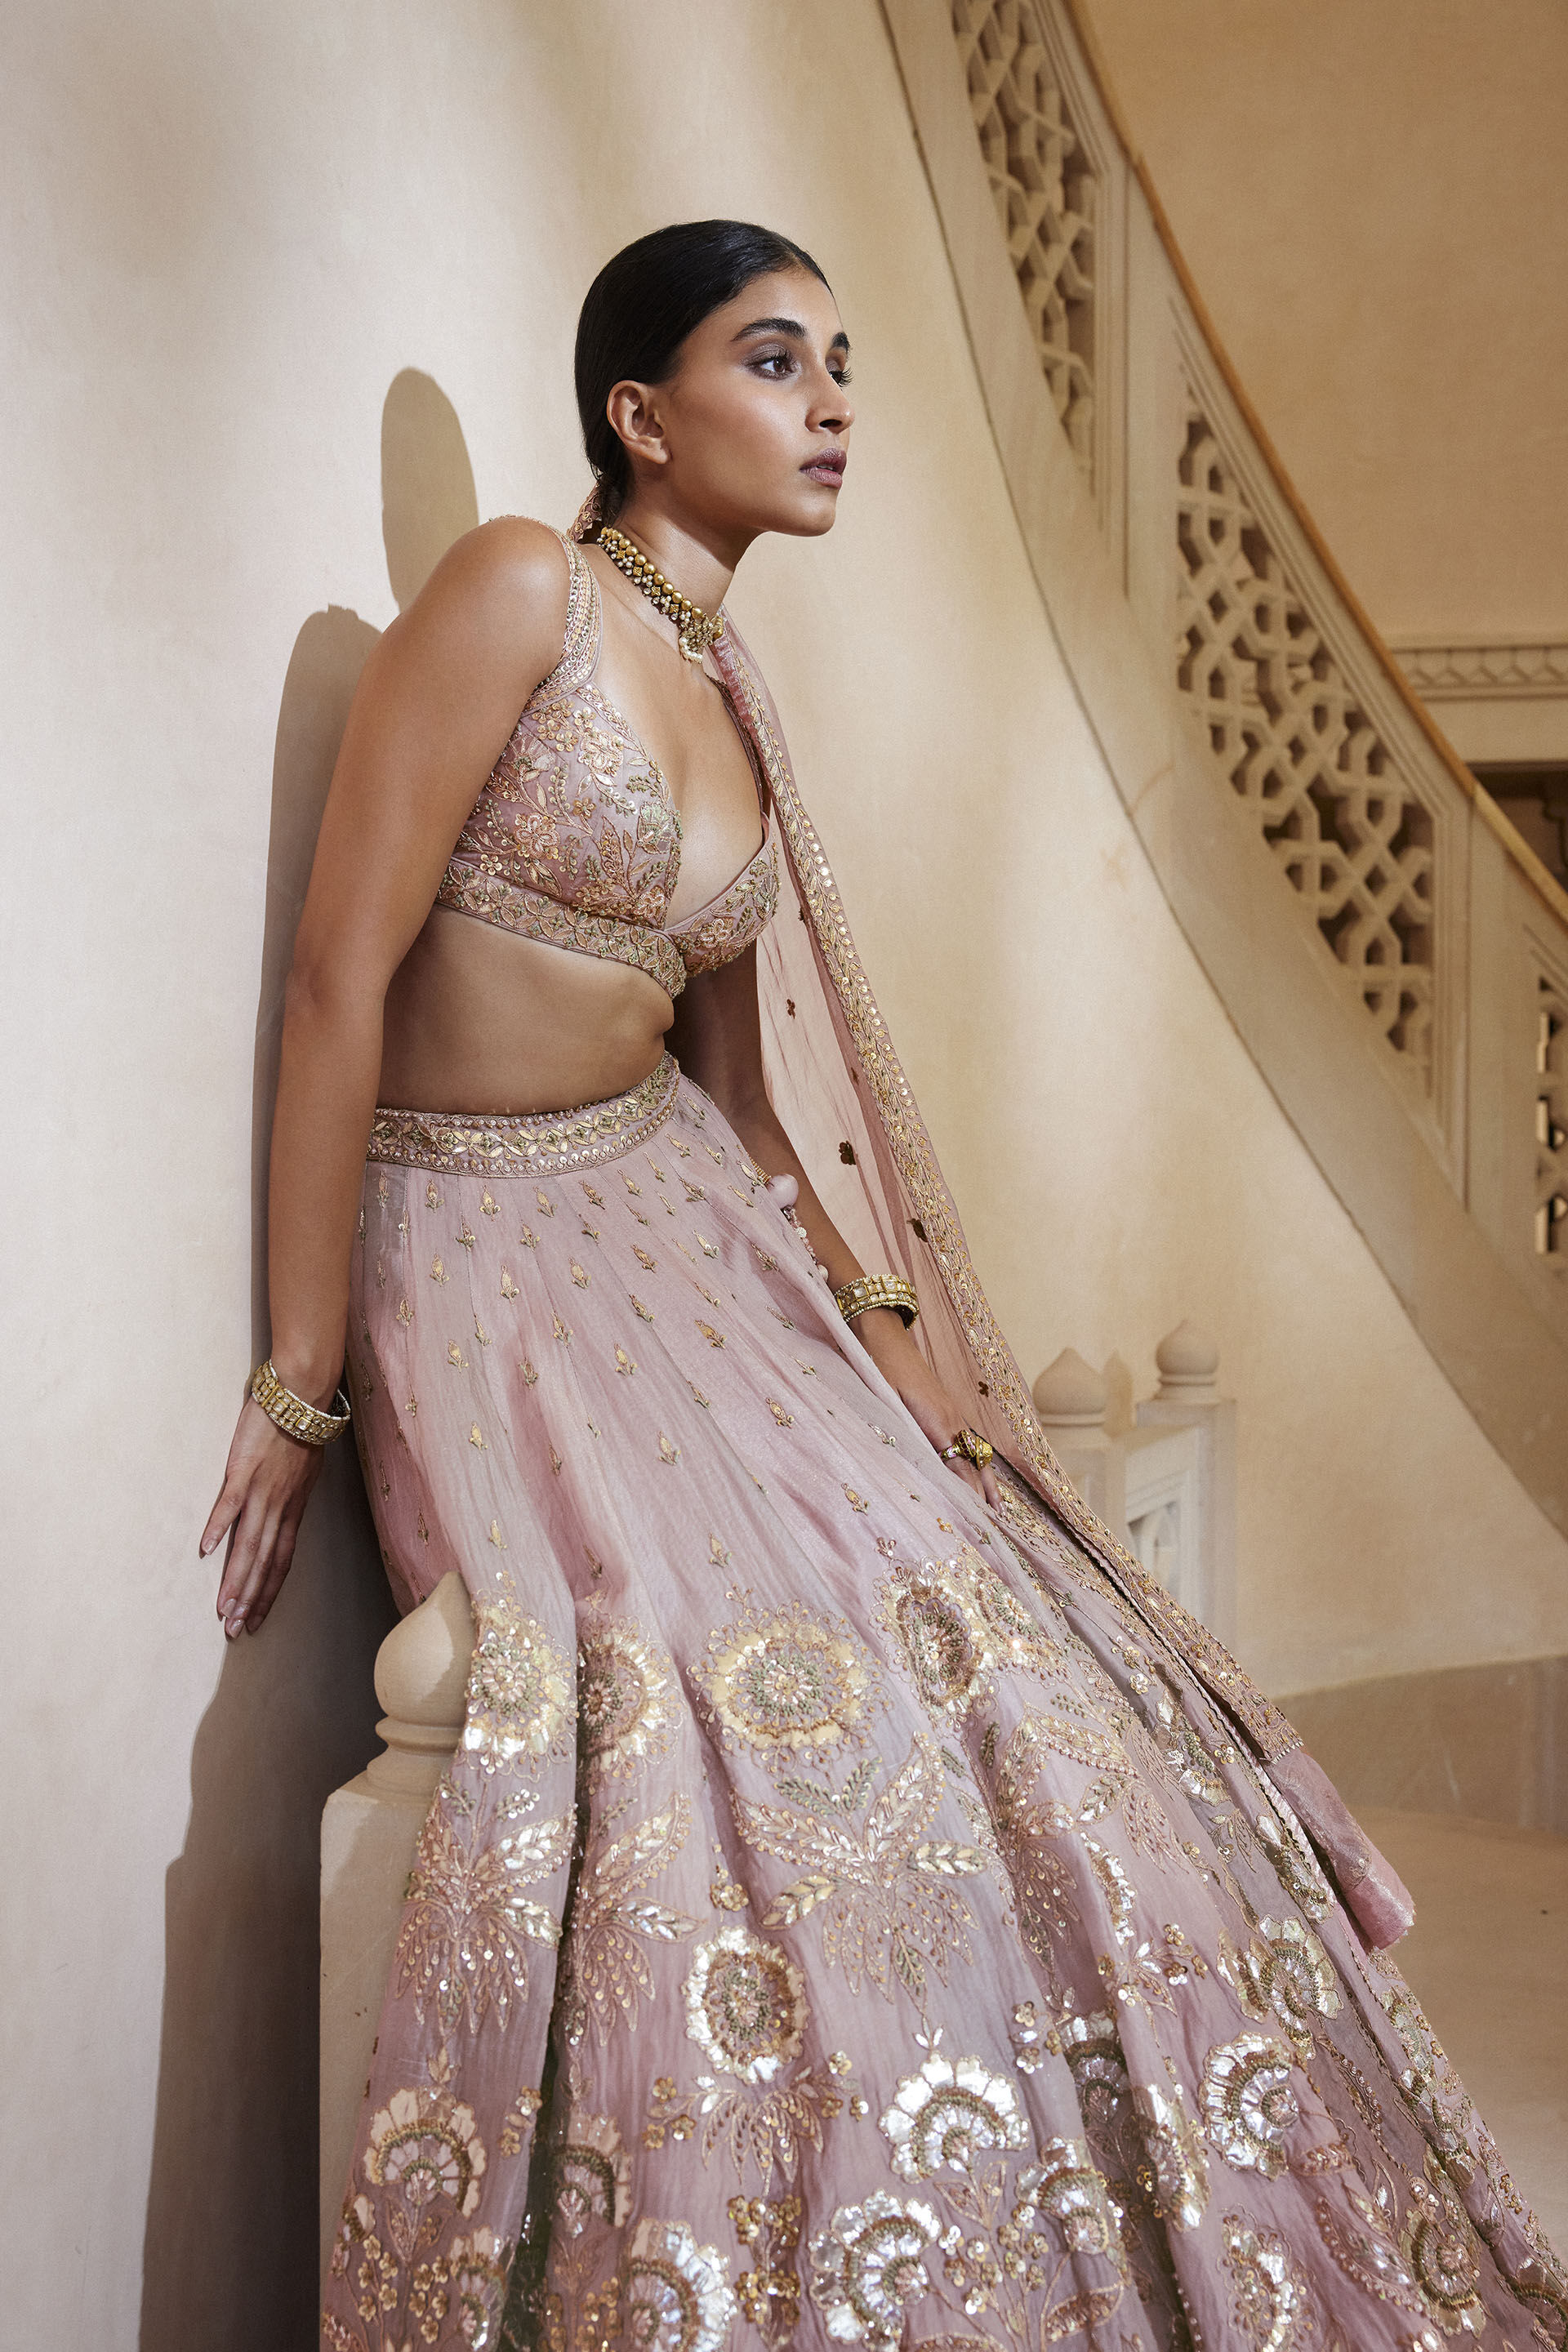 Best Labels To Buy Gotapatti Lehengas From! | WedMeGood